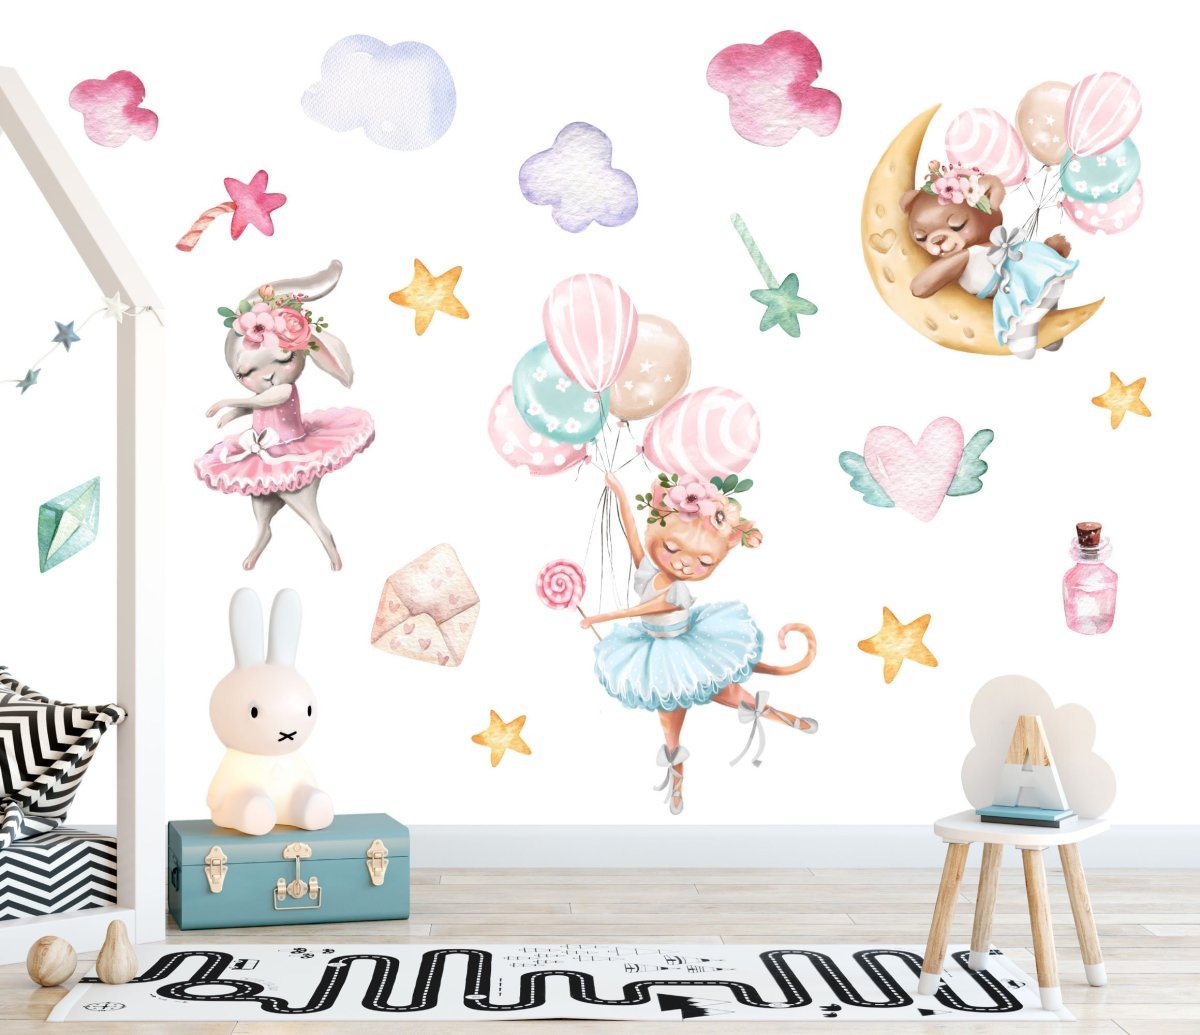 Wall Decal for Kids Room Magic Ballerinas from ECO STICKER Re-useable